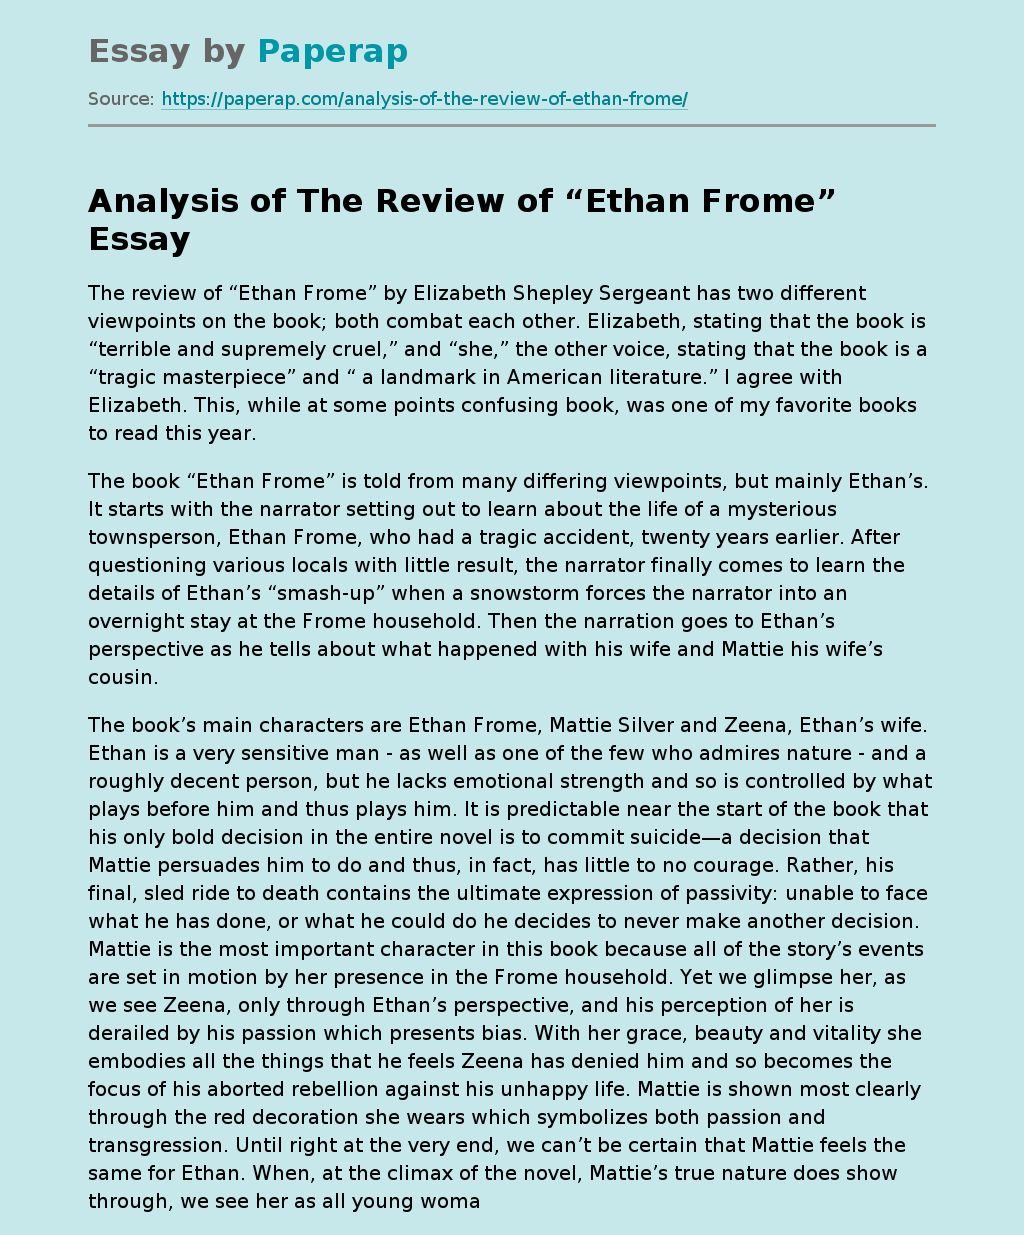 Analysis of The Review of “Ethan Frome”